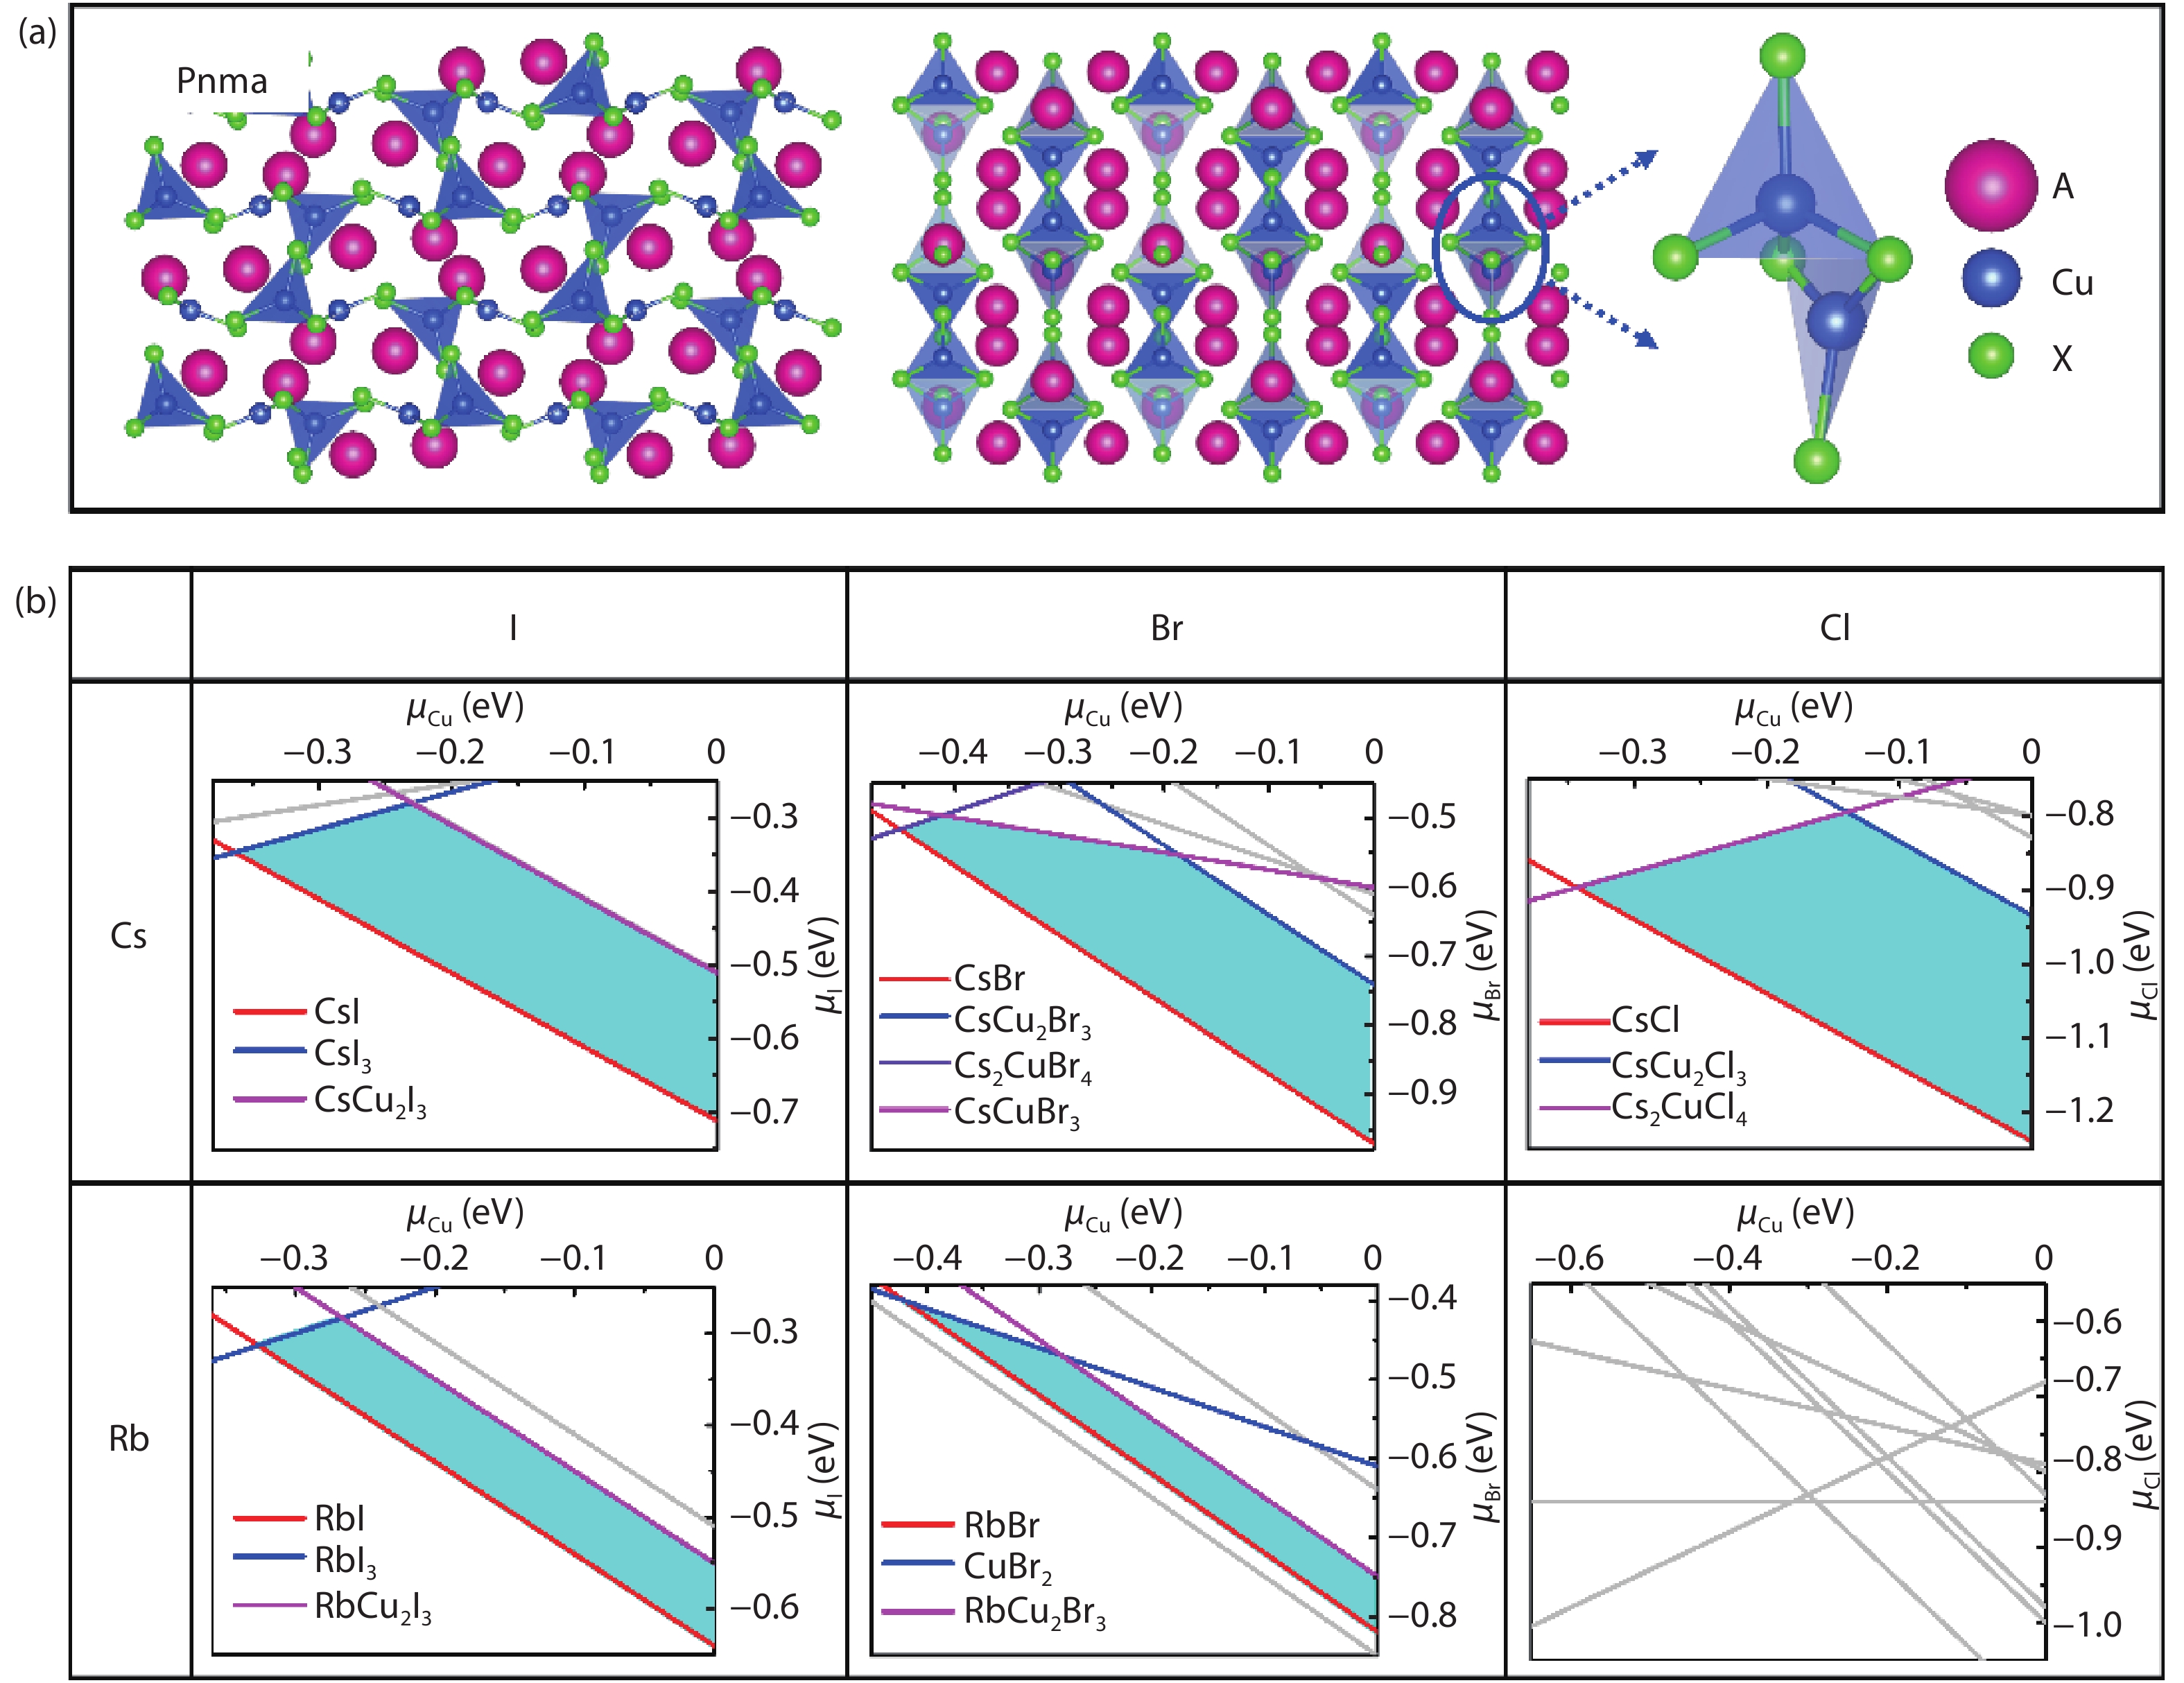 (Color online) (a) The optimized structure of CHPs with 325-type, they own the isostructural model with space group of Pnma, isolated [Cu2X5]3– anion unit is composed of two types of Cu+ sites, a trigonal site and a tetragonal site. (b) Calculated phase stability regions versus μCu and μX (referring to the chemical potential of Cu and X from that of their elementary substance) from left to right for the X site of I, Br, and Cl element and up to down for Cs and Rb element on A site, respectively. The cyan polygon region represents thermodynamic stability growth region, which is encircled by possible competing phases using colored line (red, blue, violet, and pink). A, Cu, and X atoms are in purple, coral and brown, respectively.